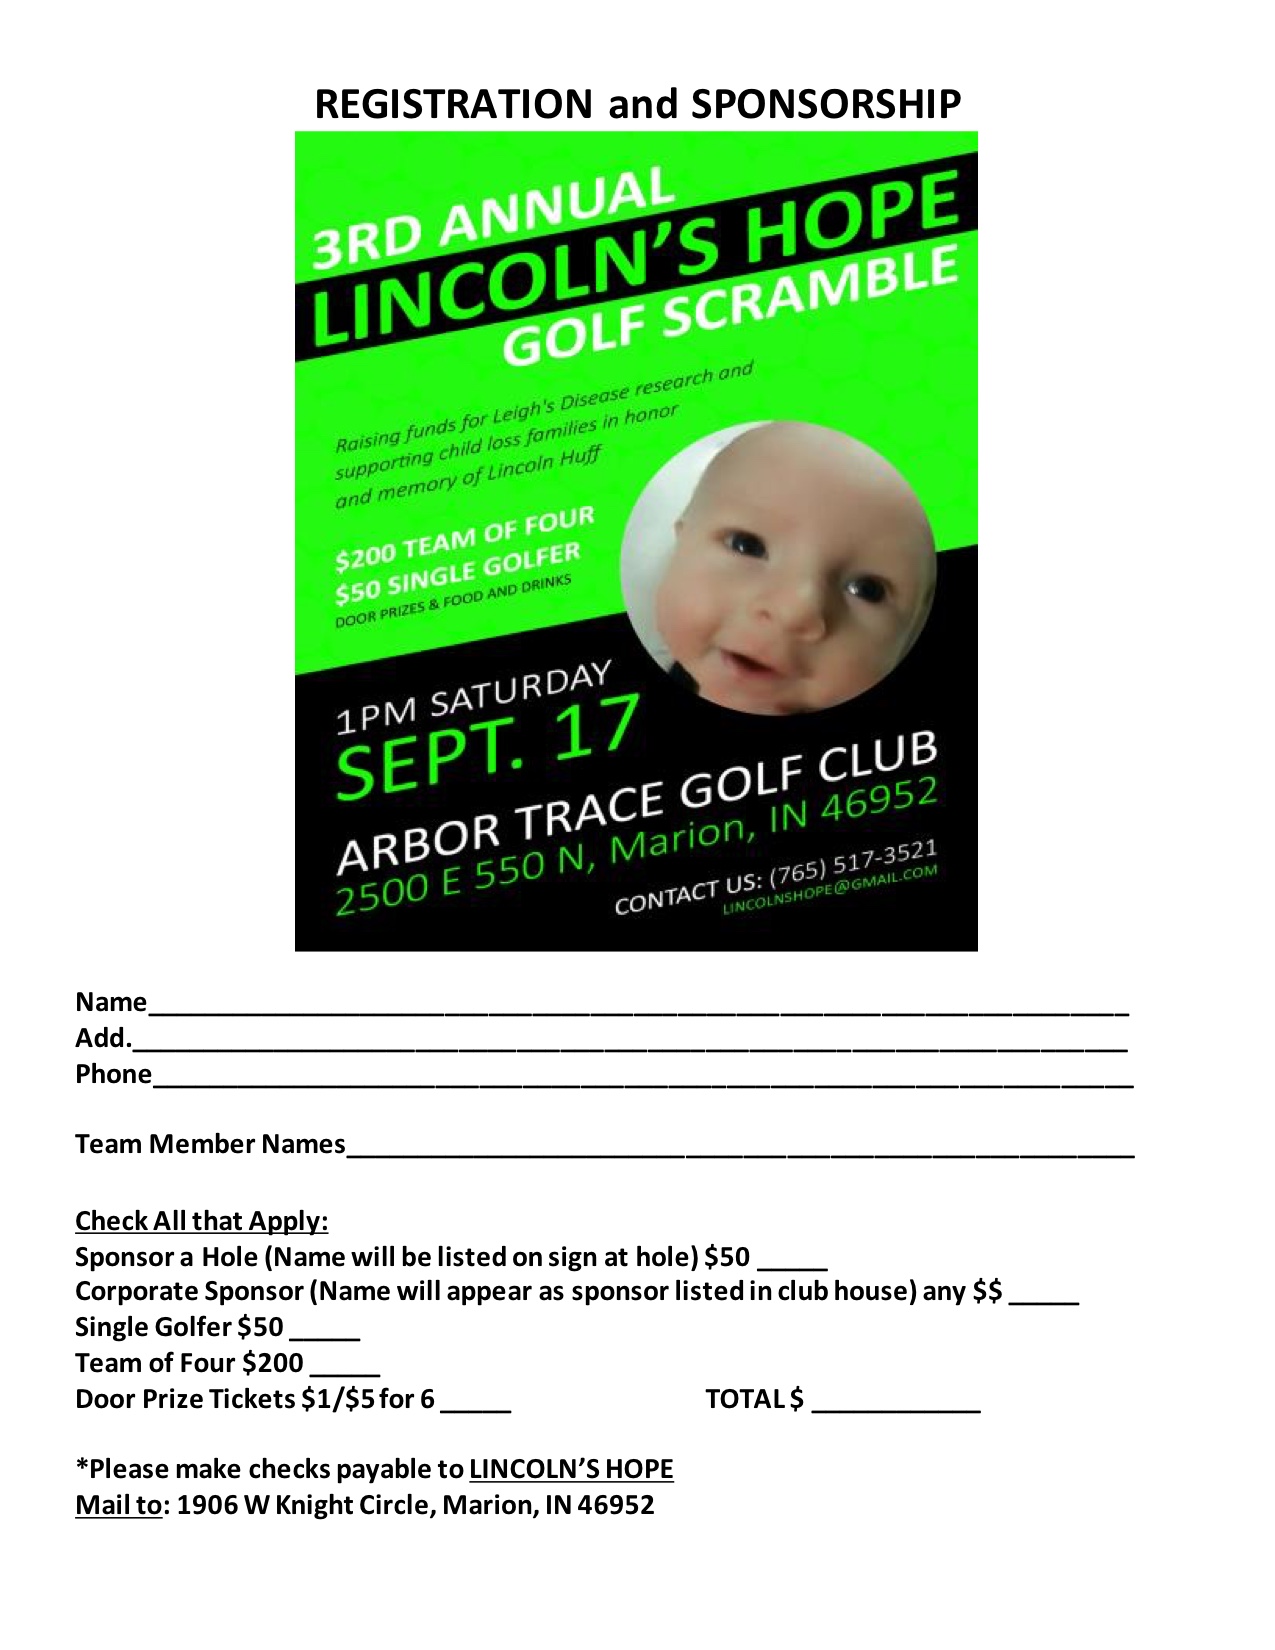 Lincoln's Hope Scramble REGISTRATION and SPONSORSHIP form 2016